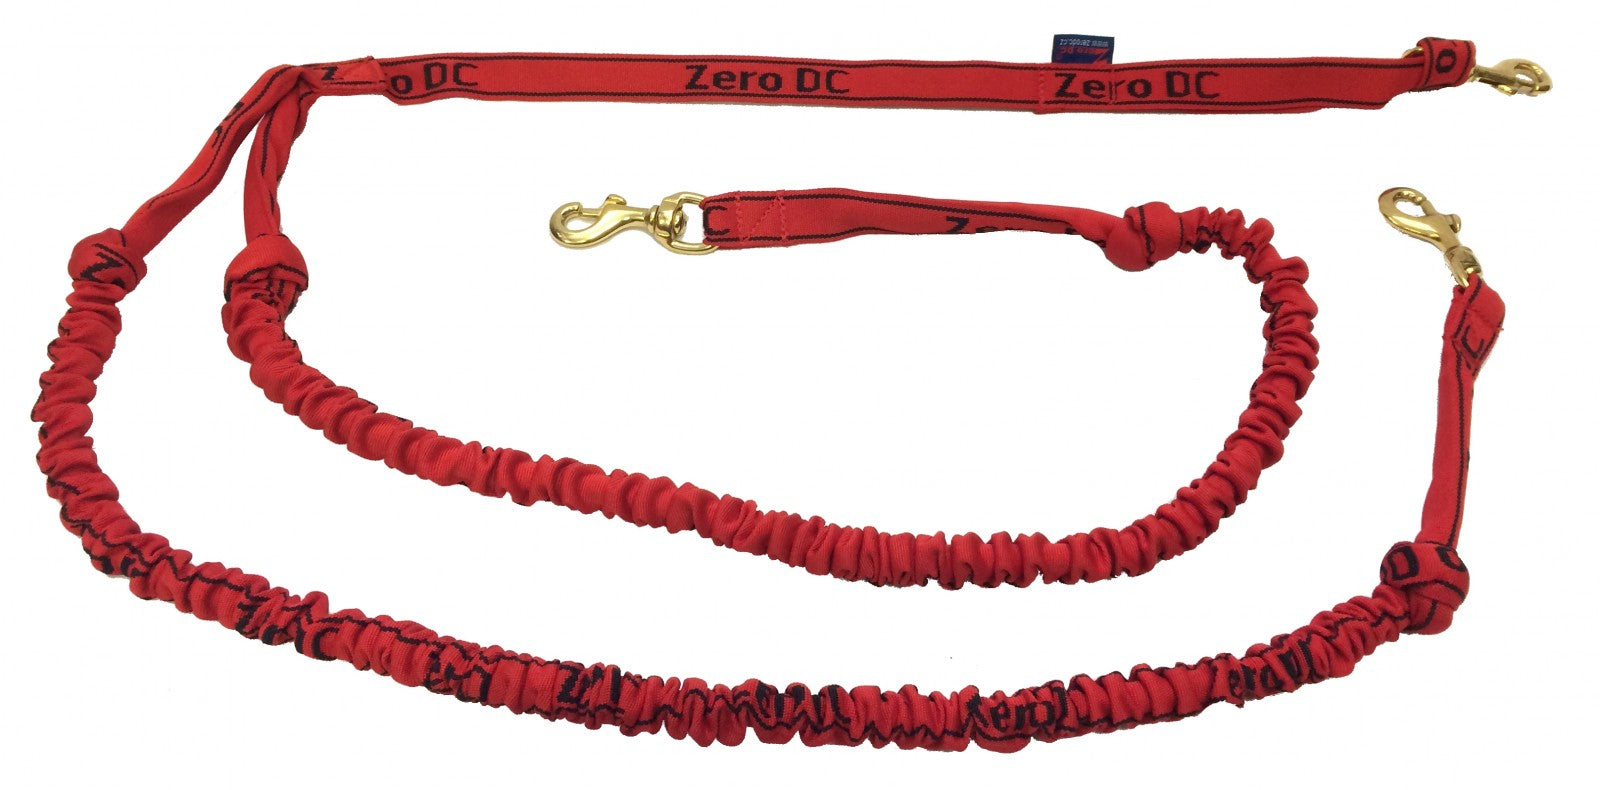 Red Zero DC 2 dog bungee line for canicross, skijoring, dogwalking